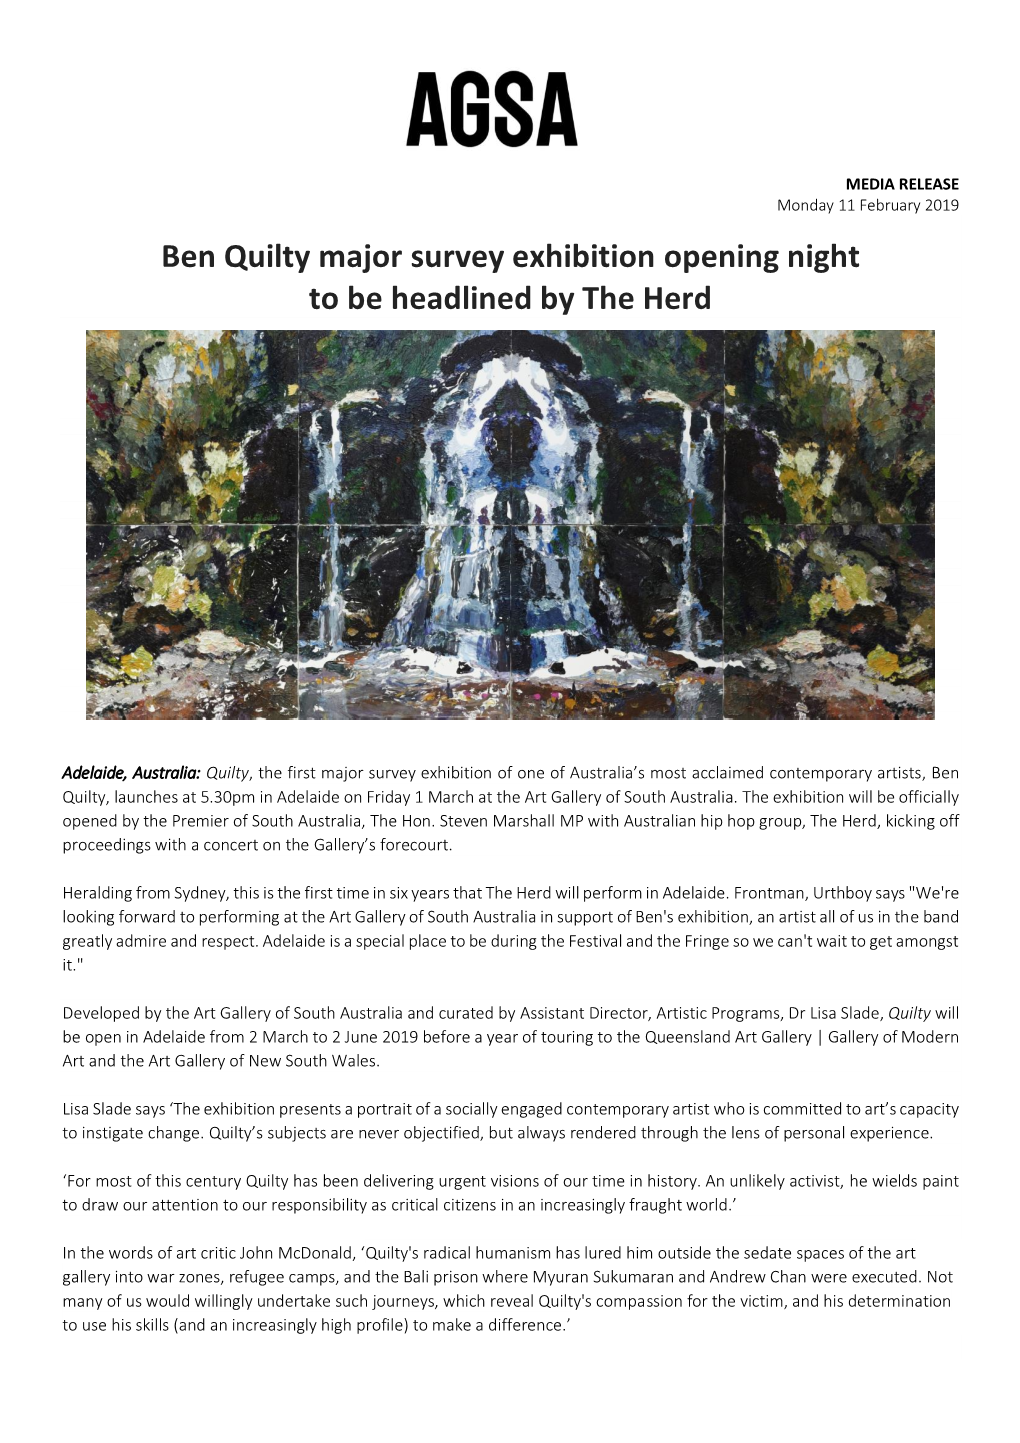 Ben Quilty Major Survey Exhibition Opening Night to Be Headlined by the Herd